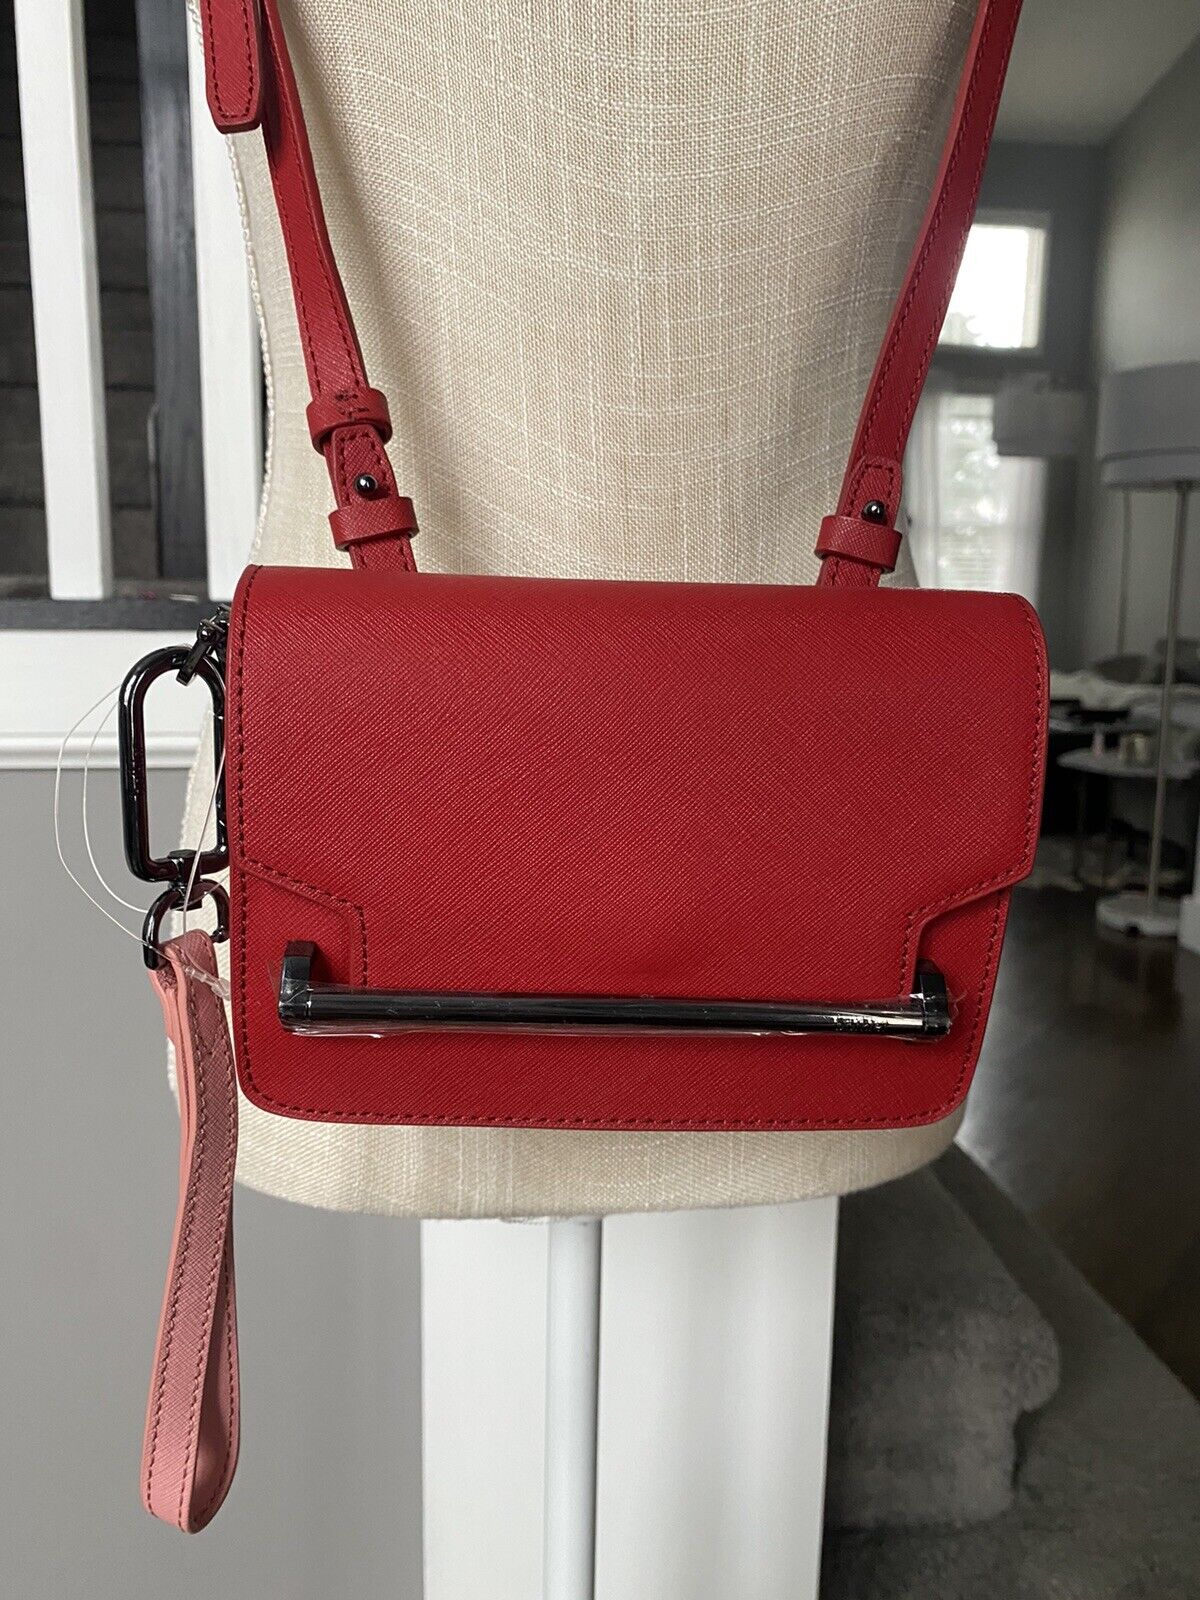 Botkier Lennox Box Leather Crossbody Bag Red New With Tags